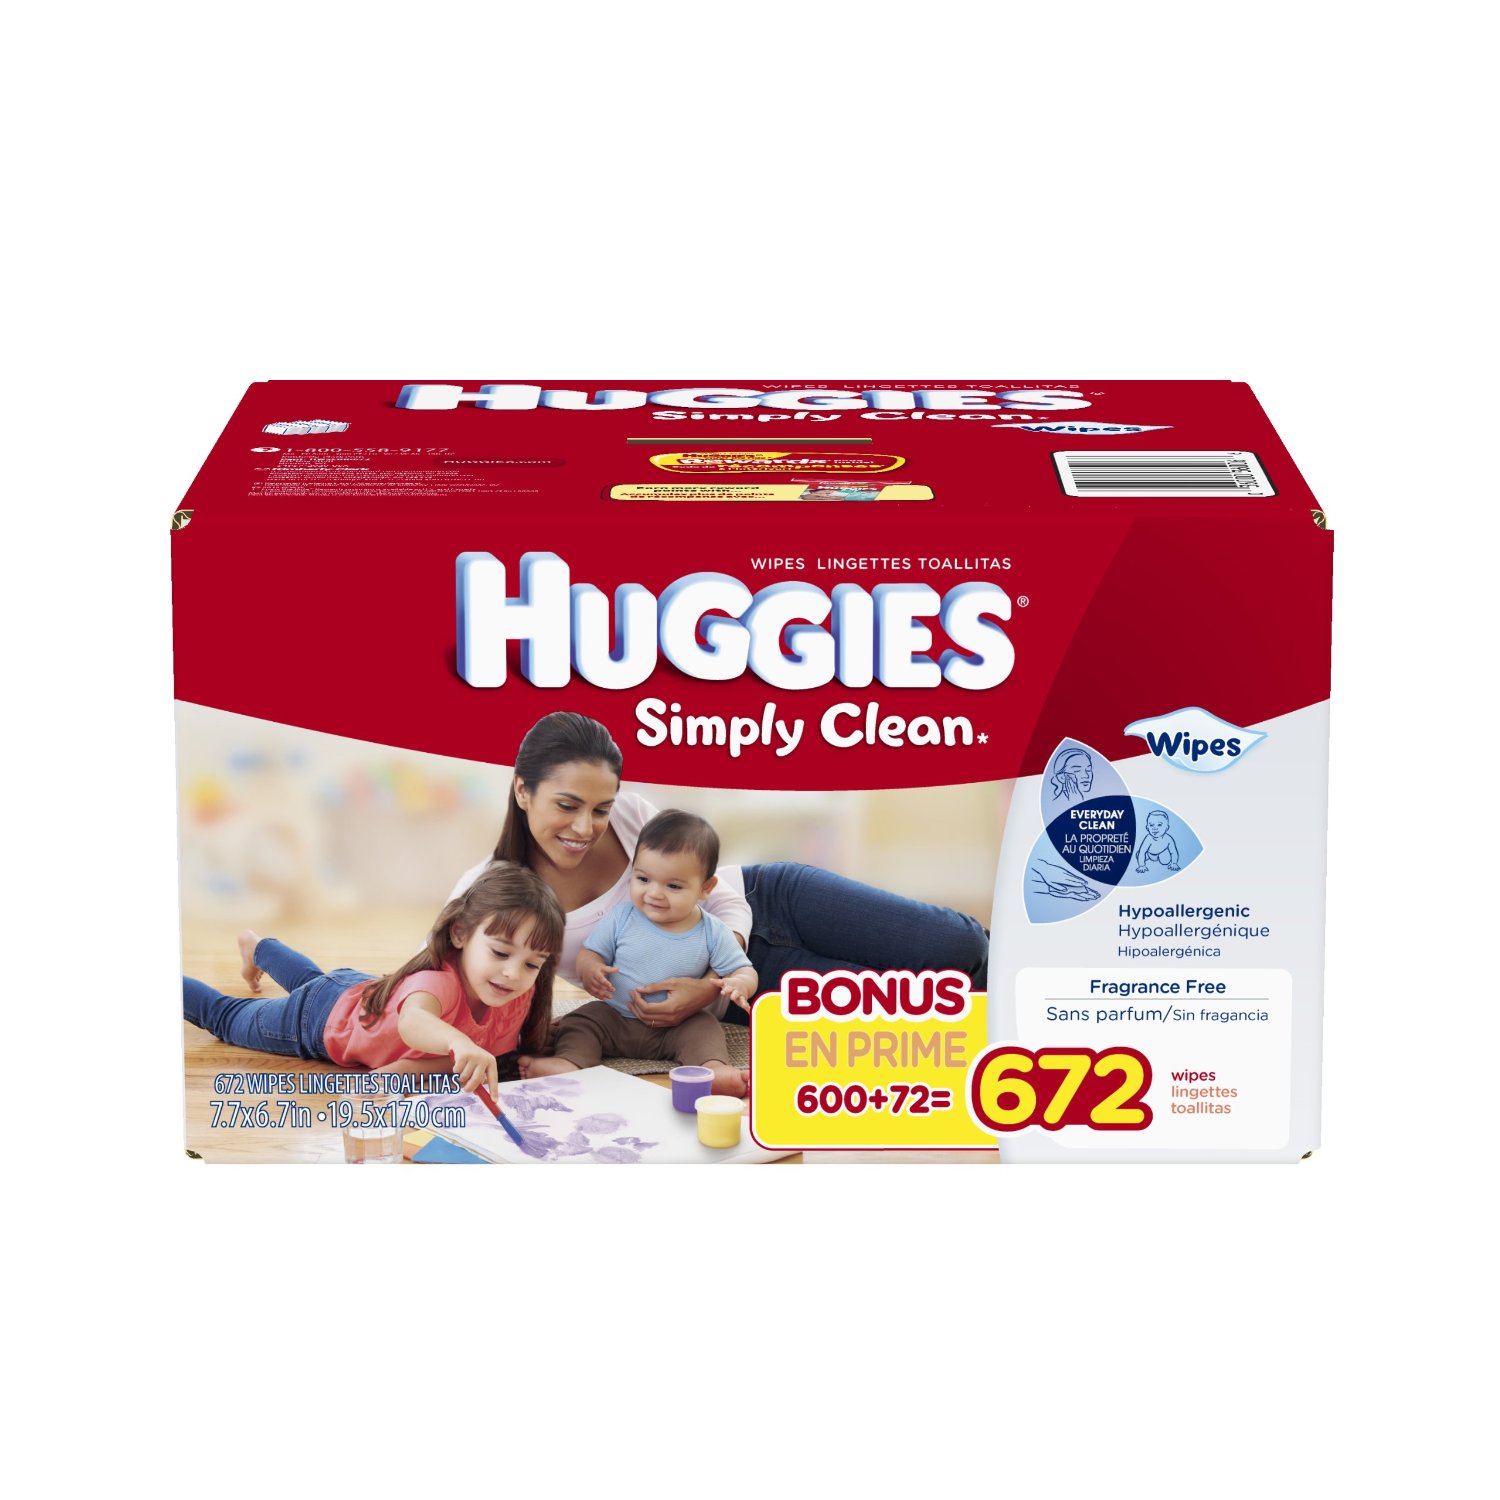 Huggies Simply Clean Fragrance Free Baby Wipes Refill, 672 Count $12.97